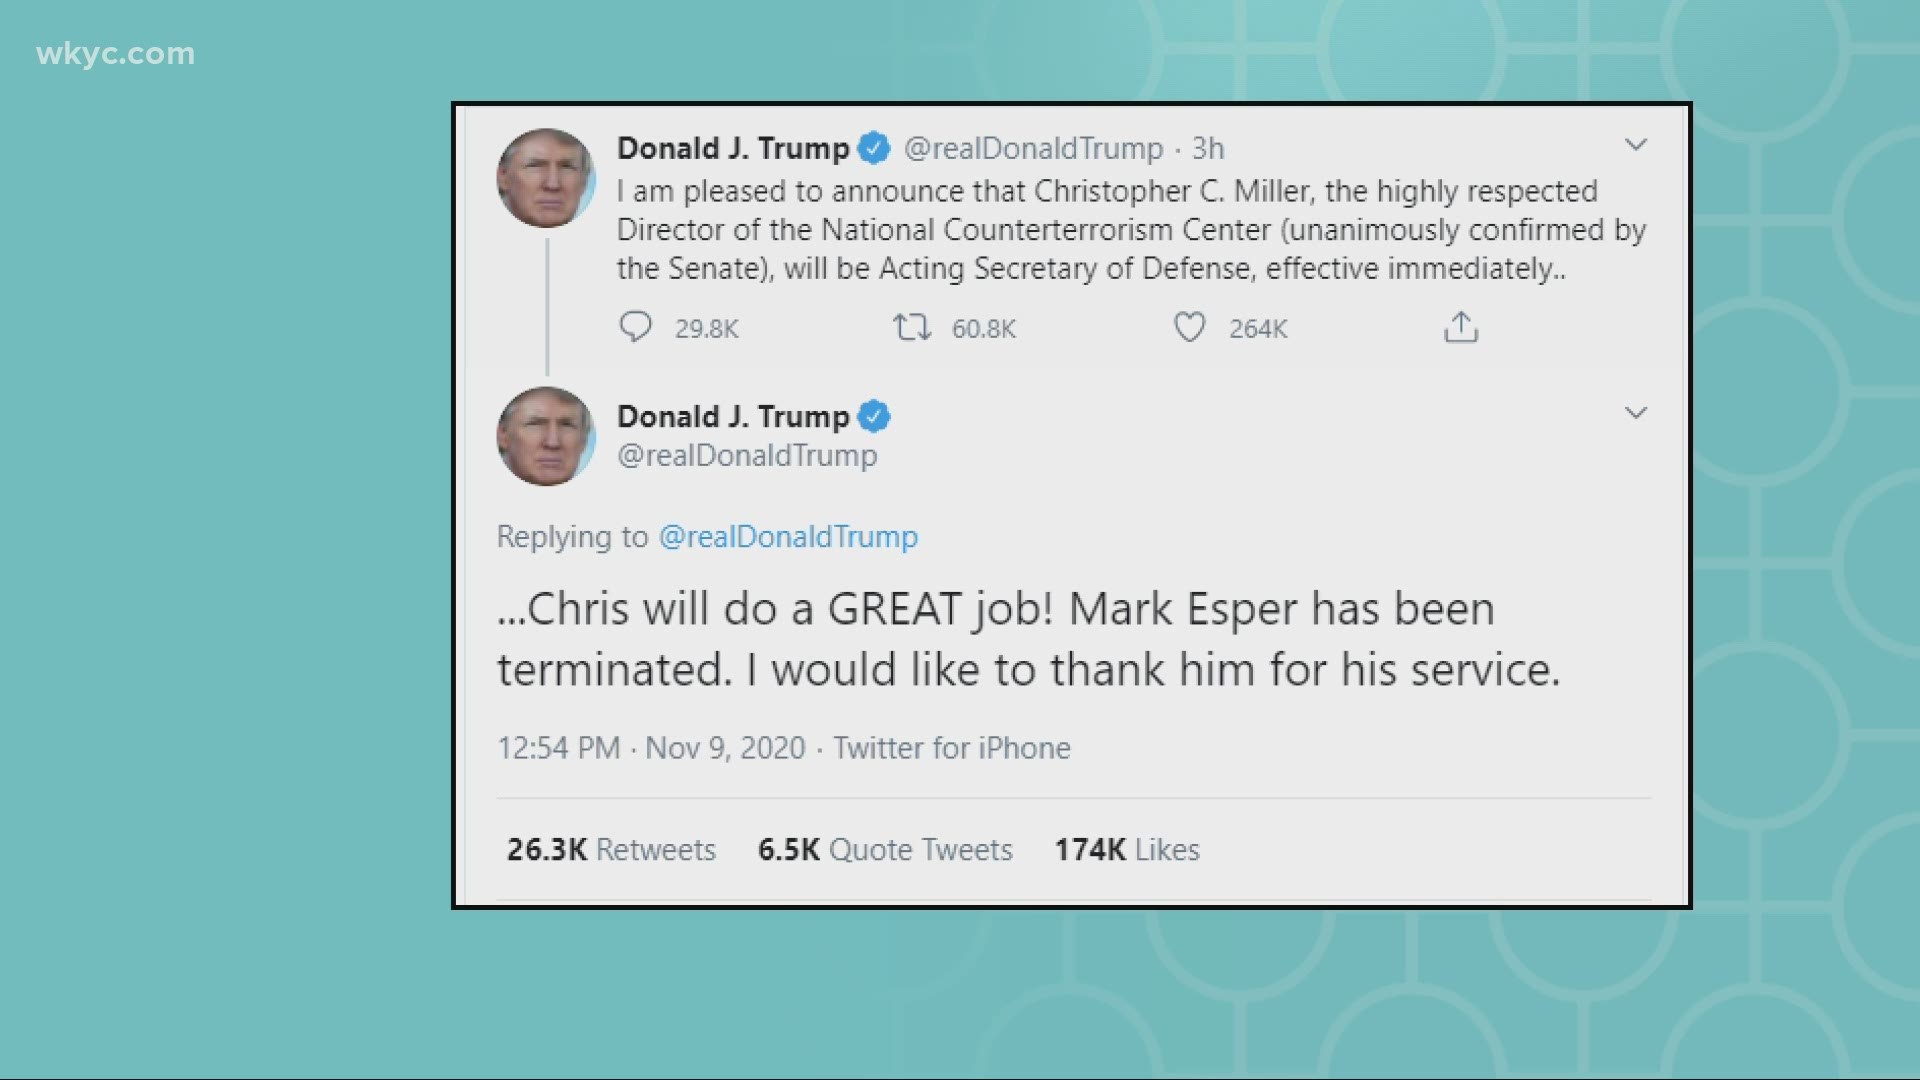 Trump tweeted that Esper has been terminated and will be replaced by Christopher Miller. Trump said the Miller has already been confirmed by the Senate.